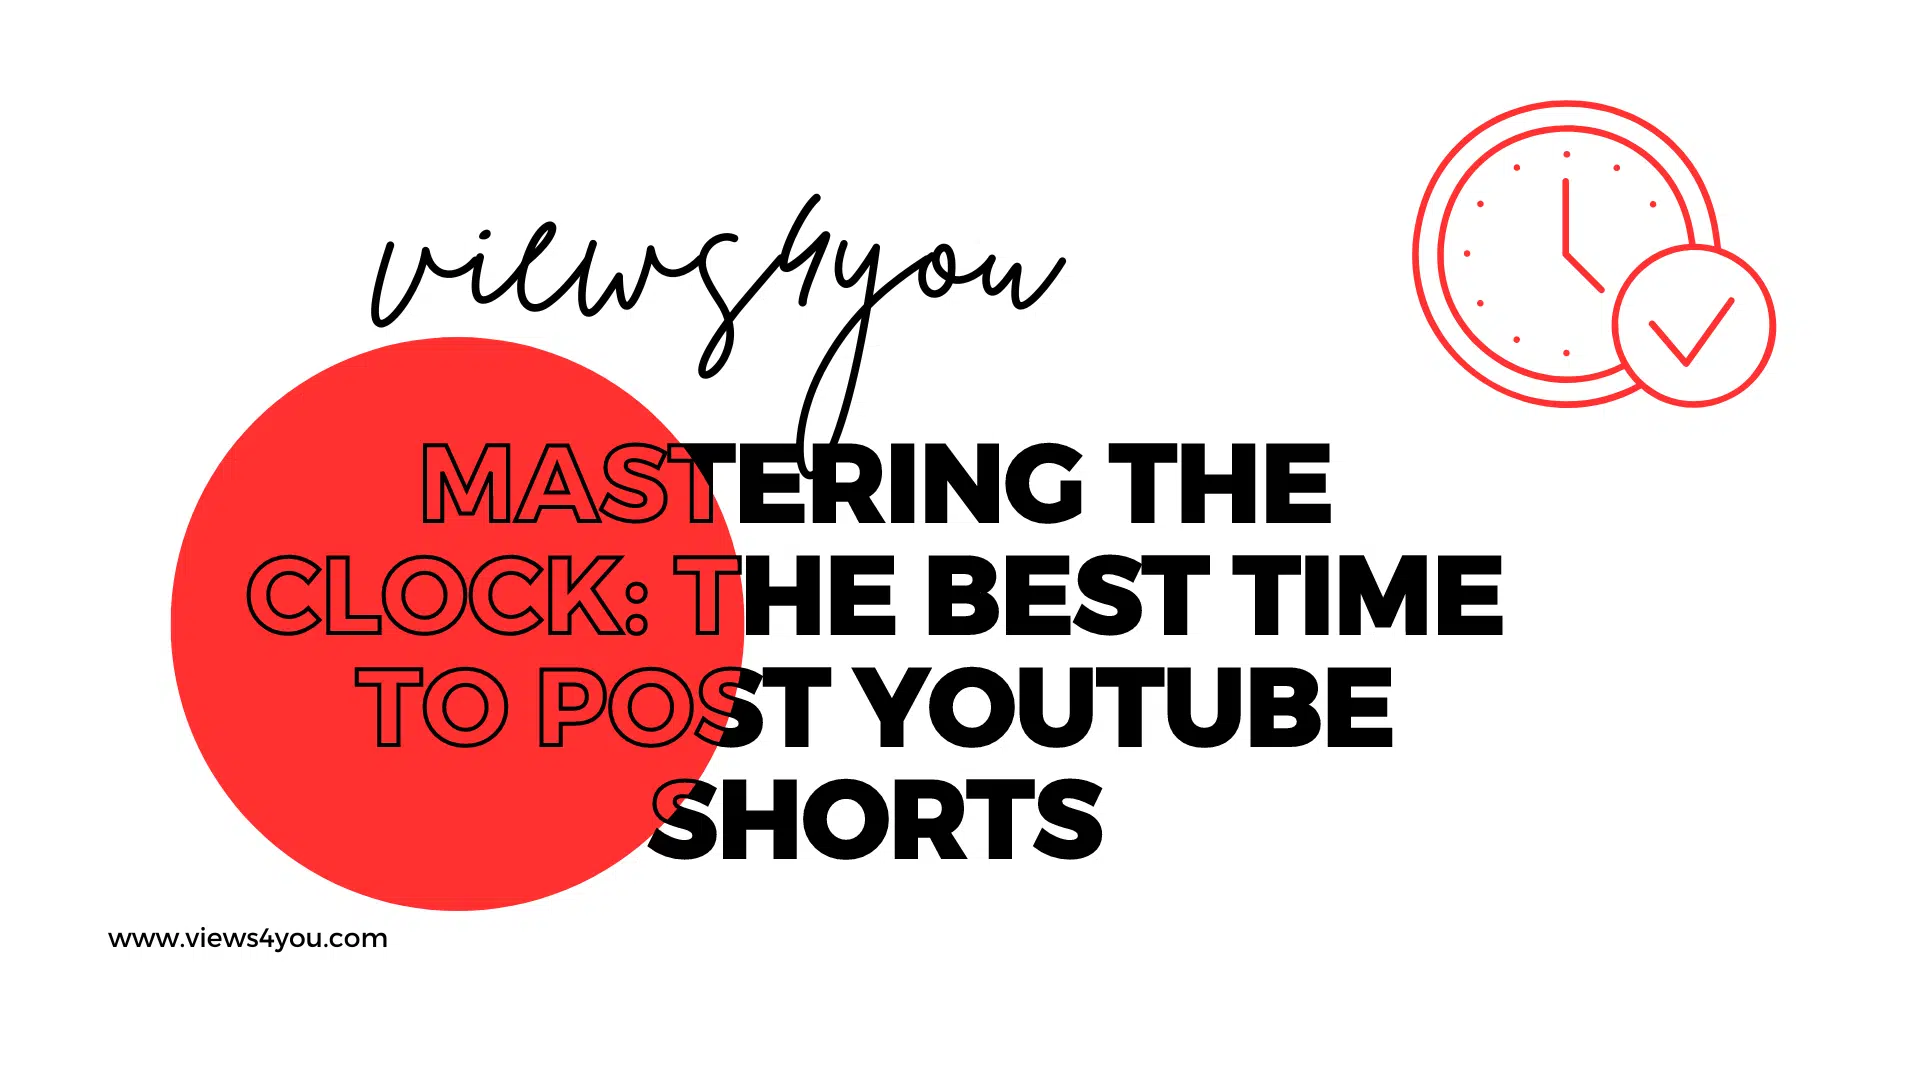 The best time to post youtube shorts on a white background.